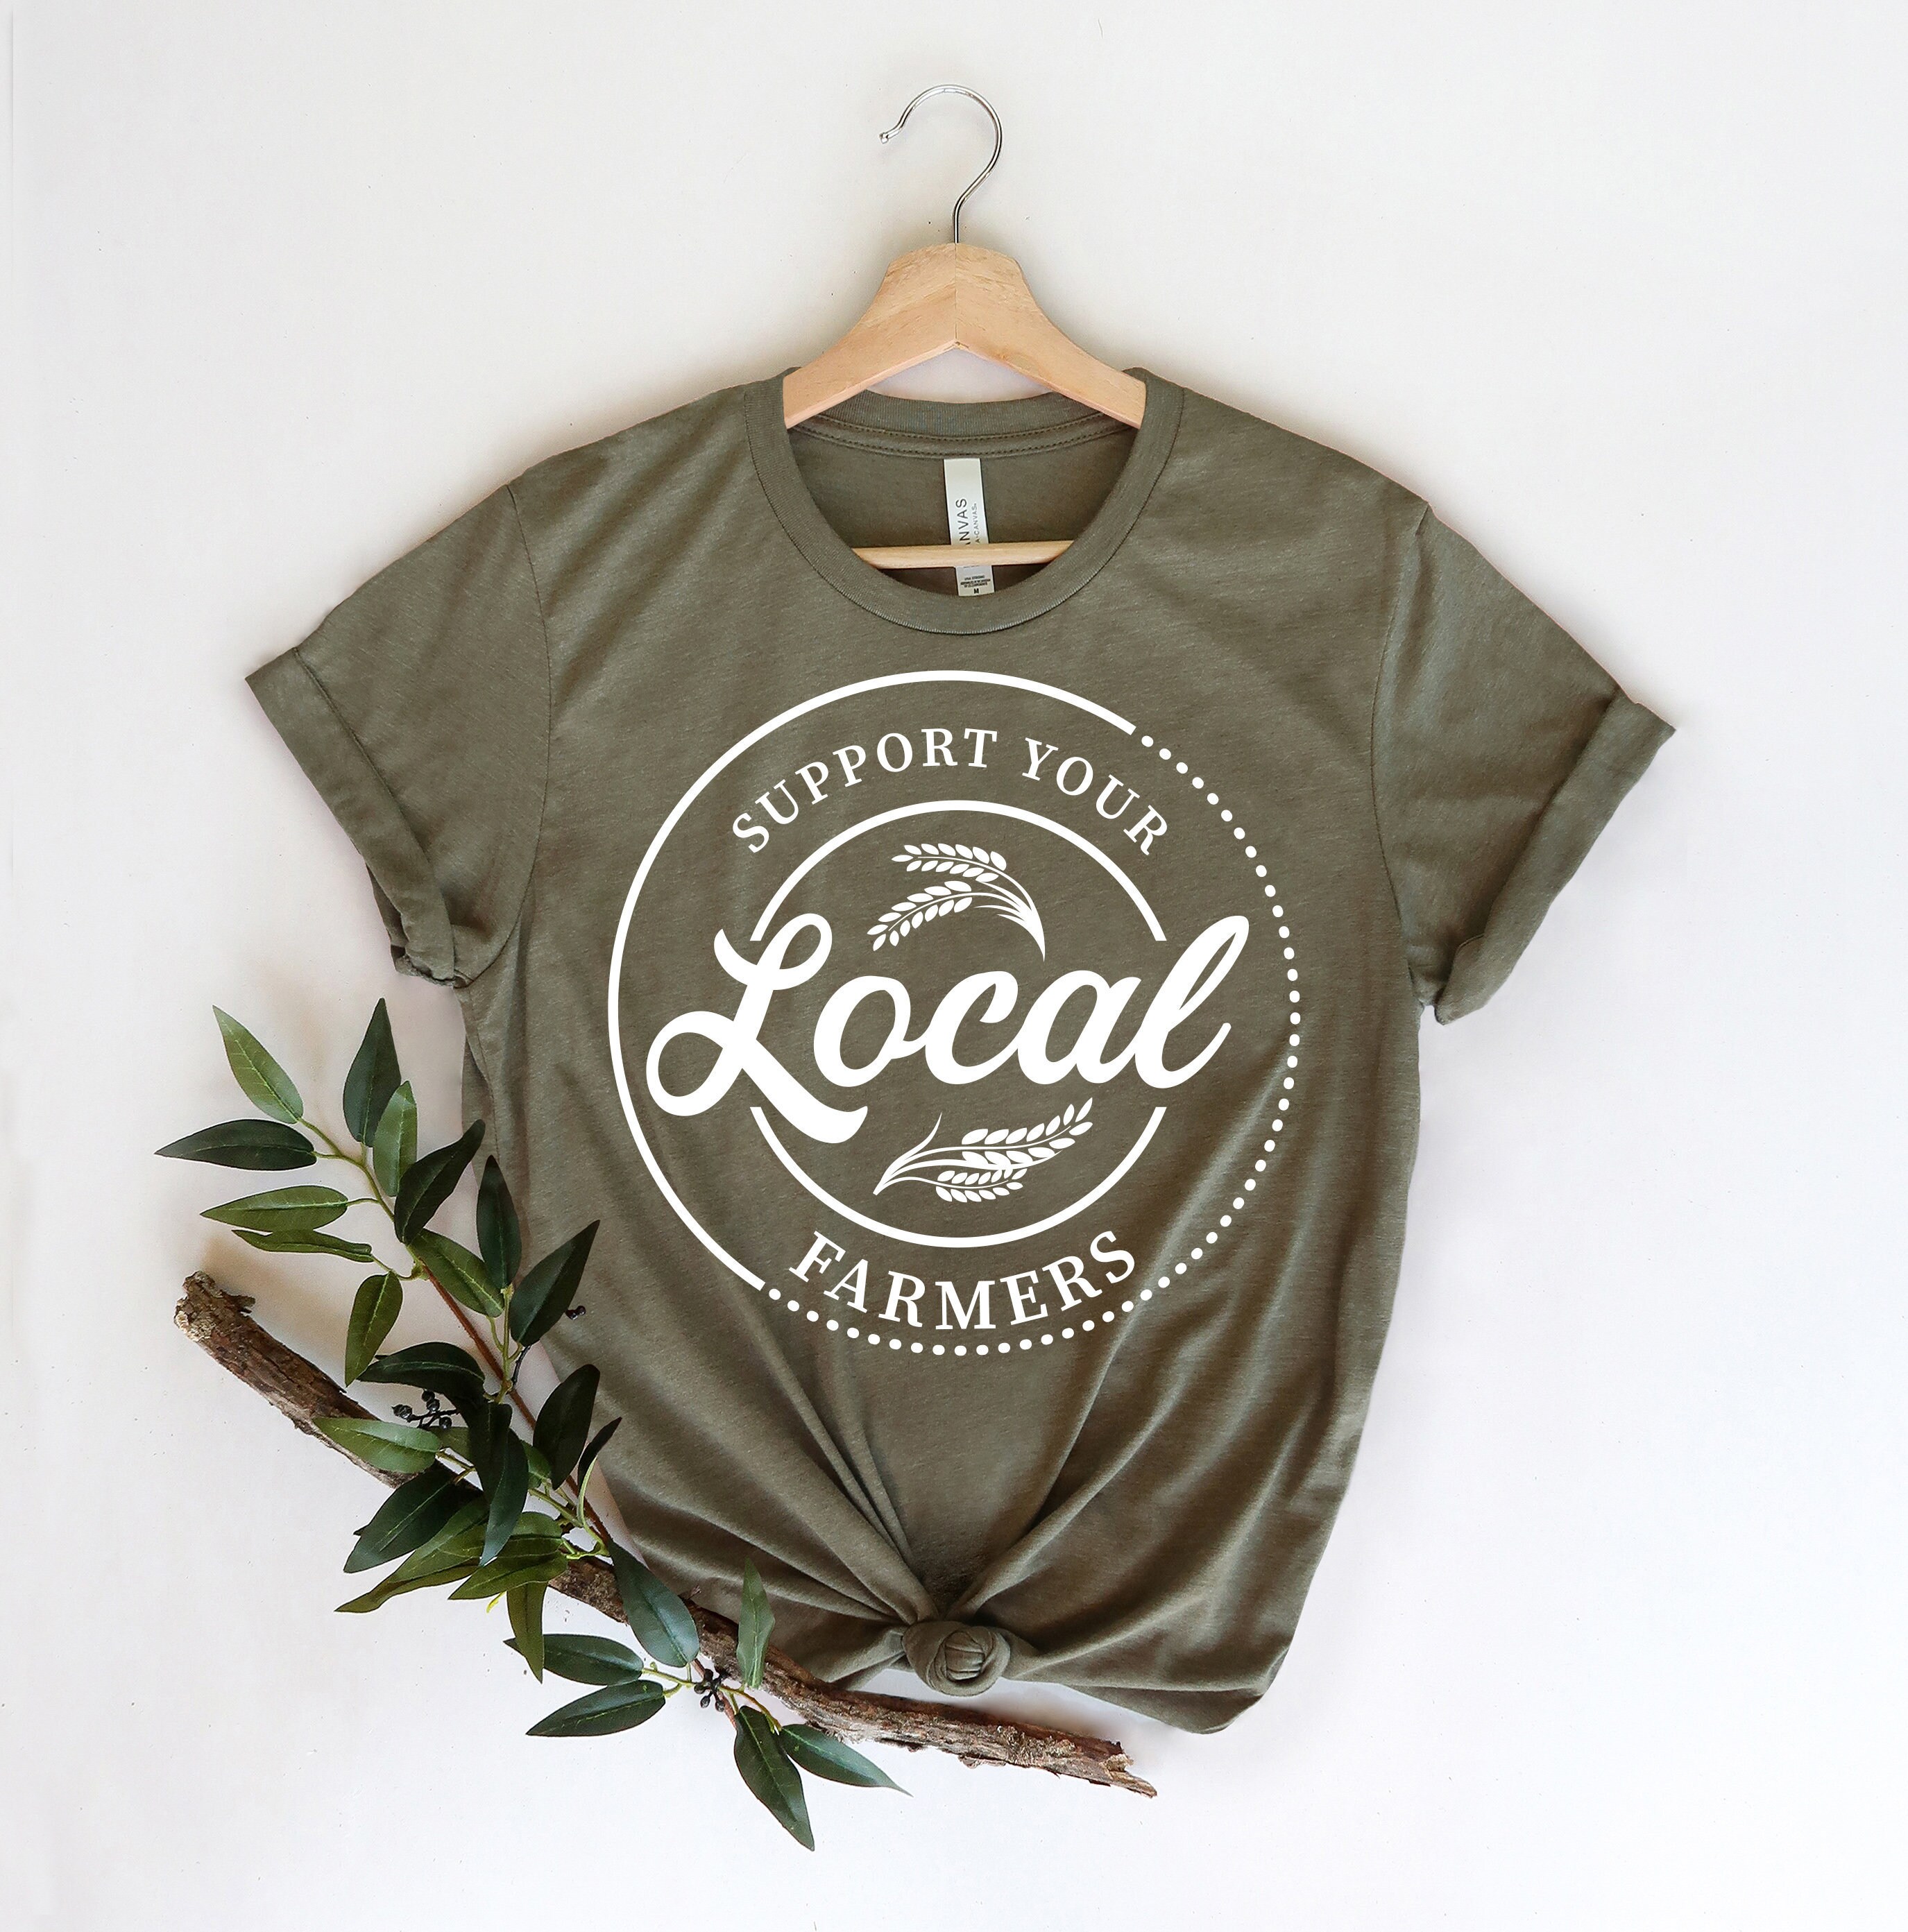 Advocating, Inspiring and Comfortable Statement Tees